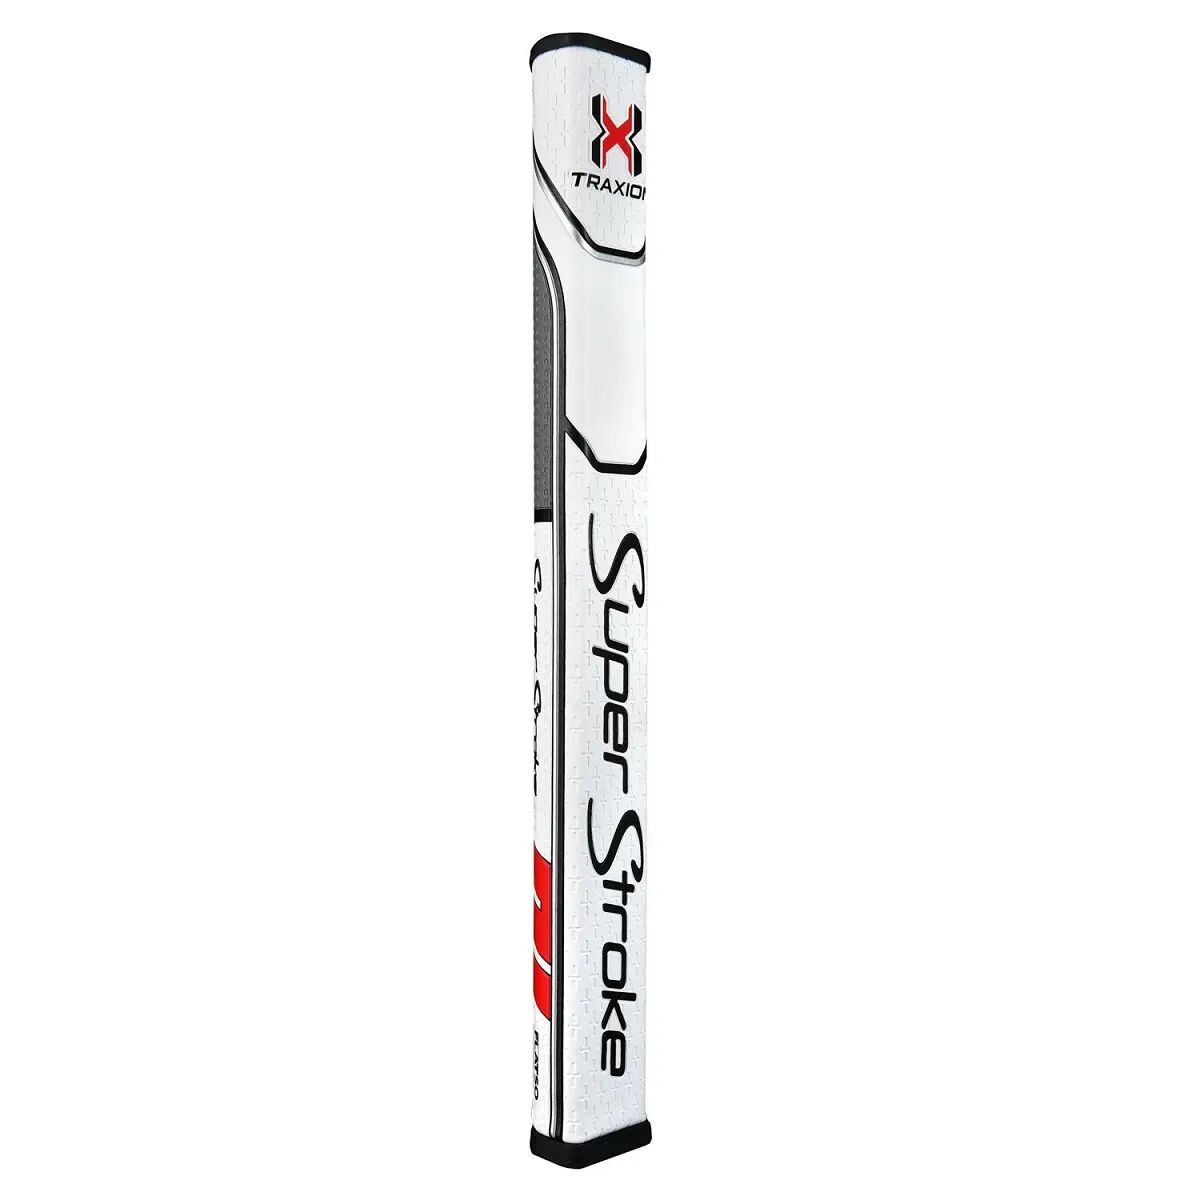 Superstroke Traxion Flatso 1.0 Putter - Non-Tapered 0.580" White/grey/red - Golf Grips